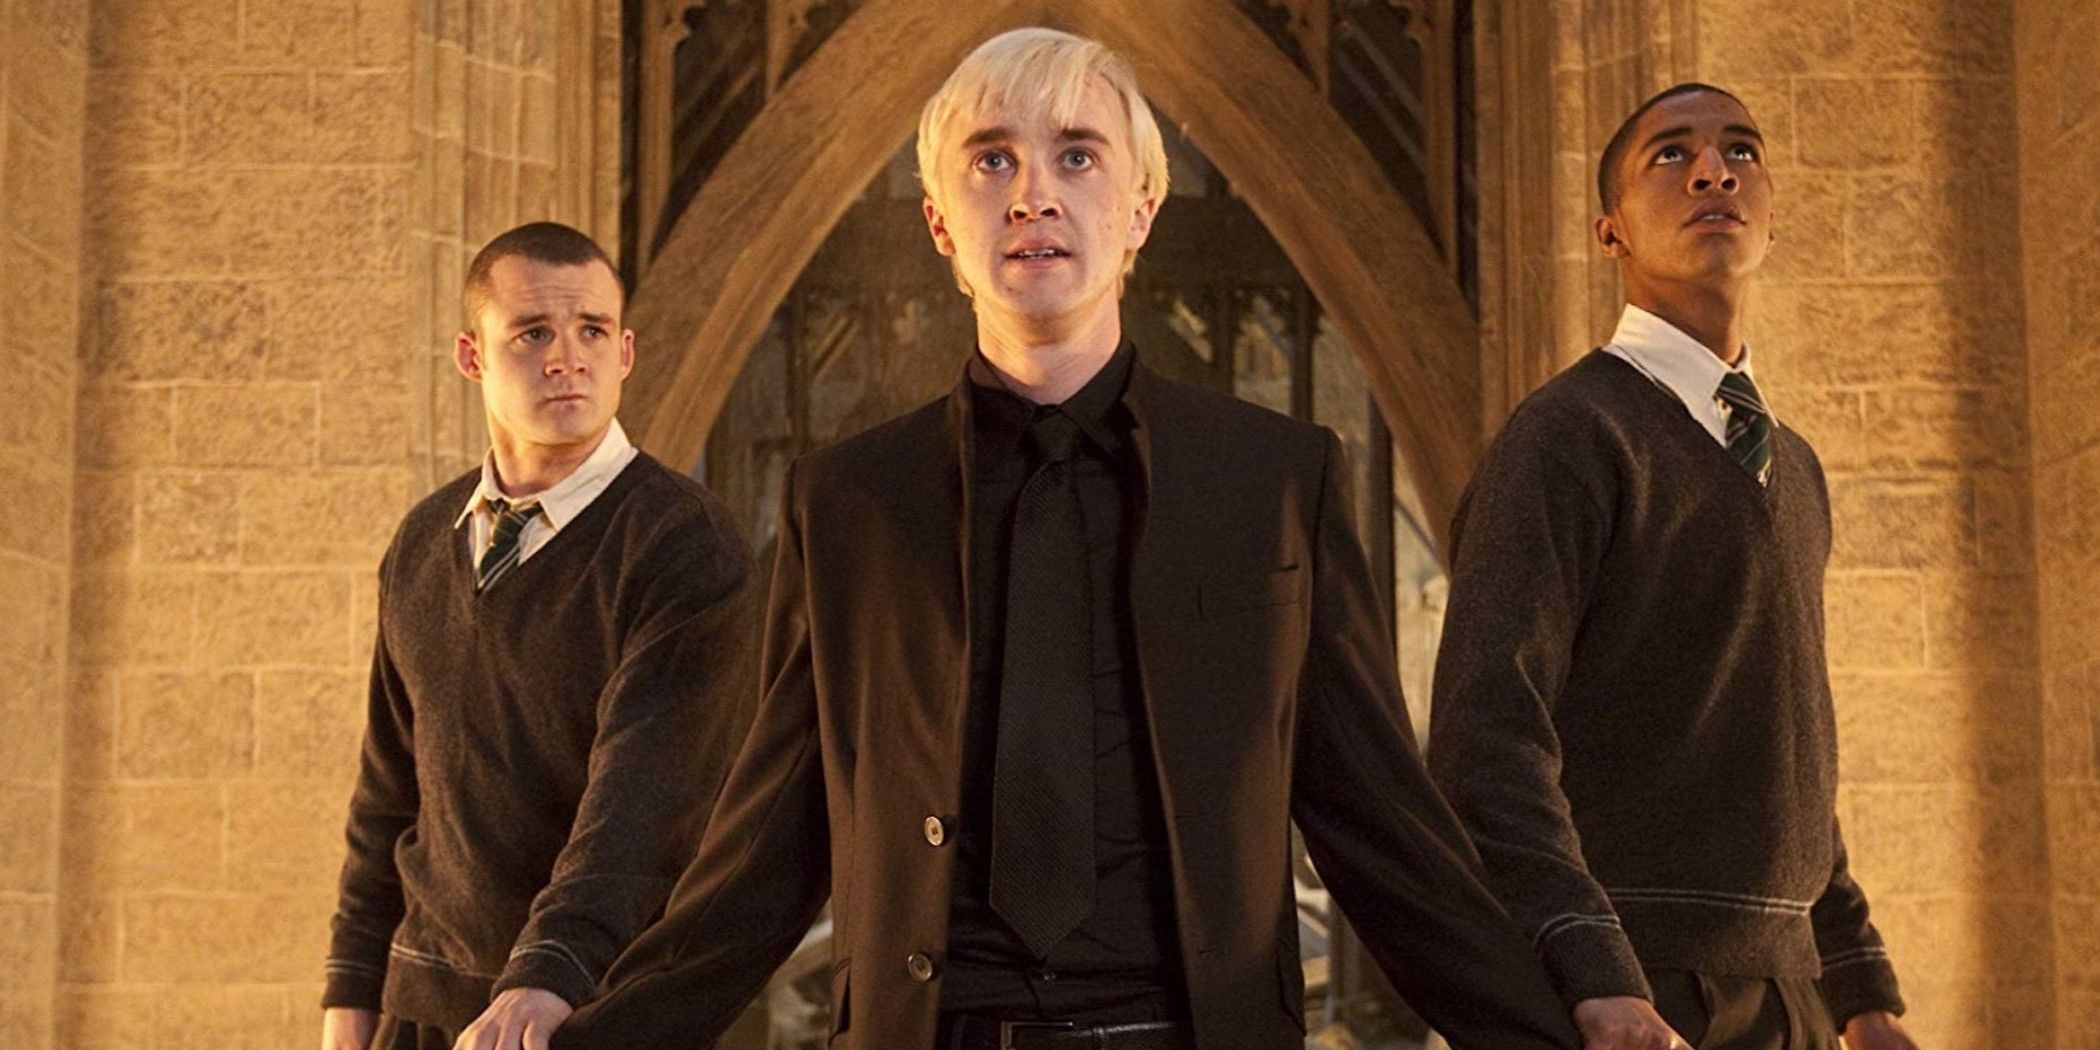 Malfoy stands with Zabini and Goyle